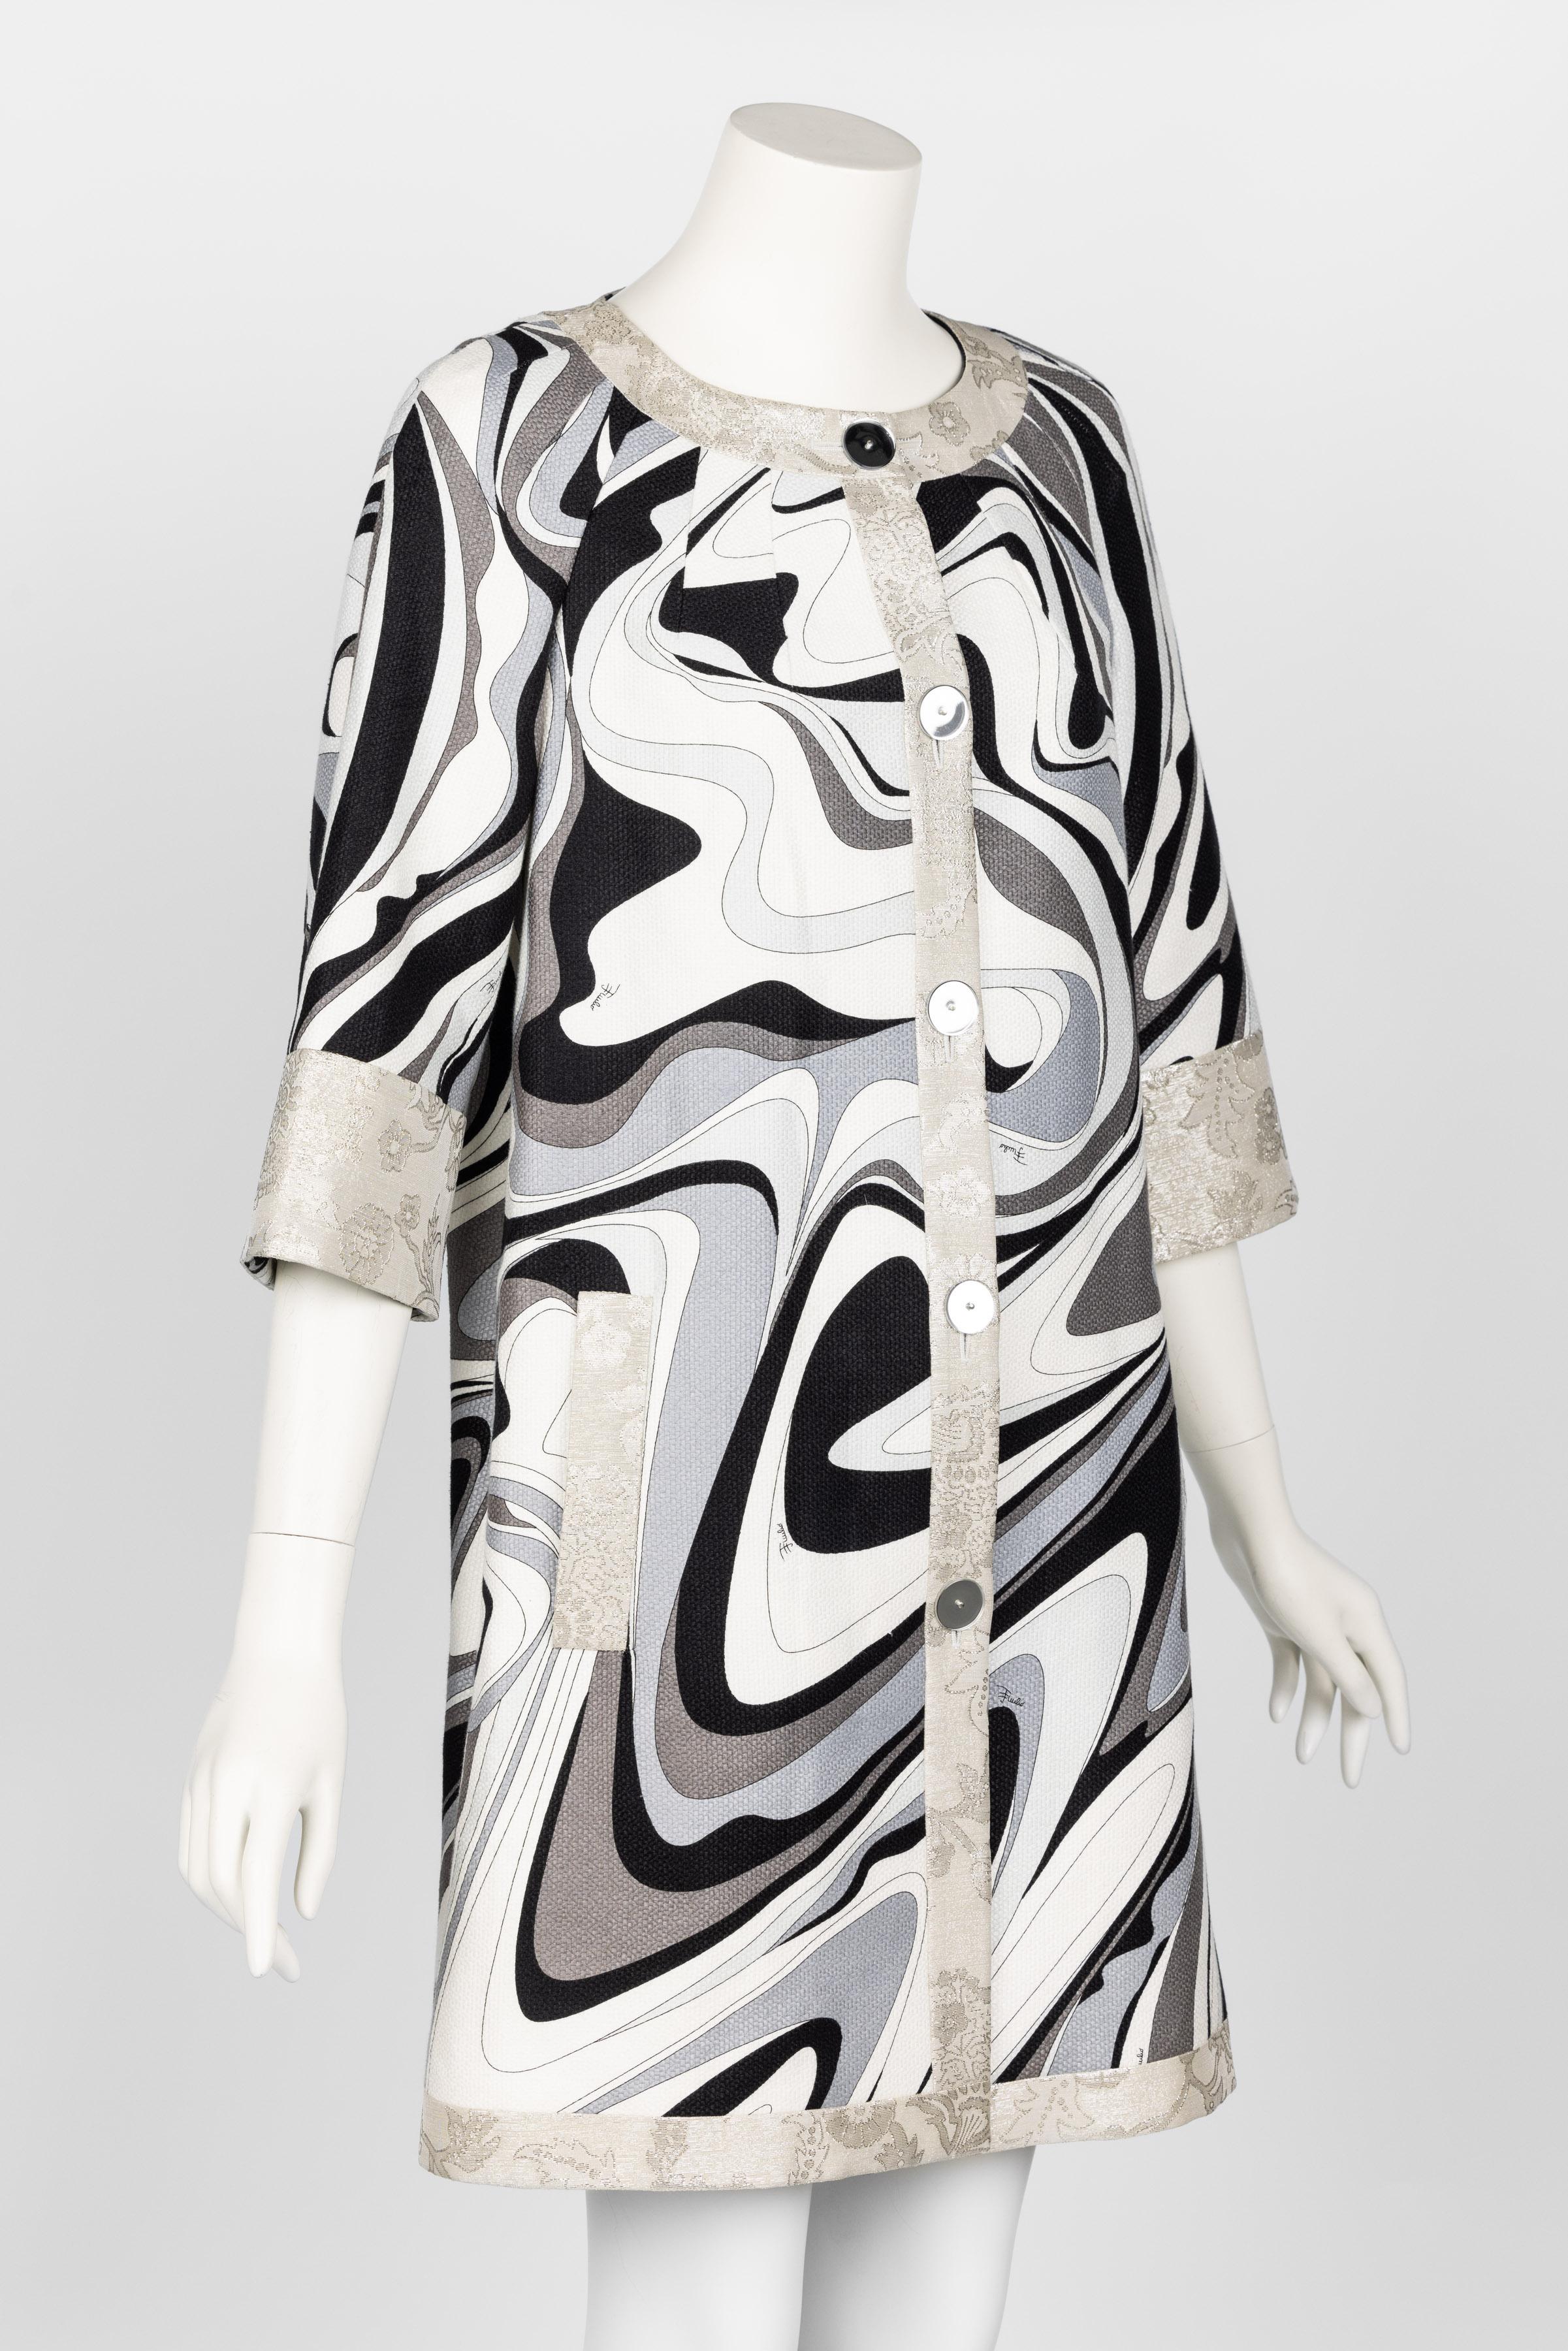 Women's Emilio Pucci Silver Black Print Spring 2007 Runway Evening Coat For Sale